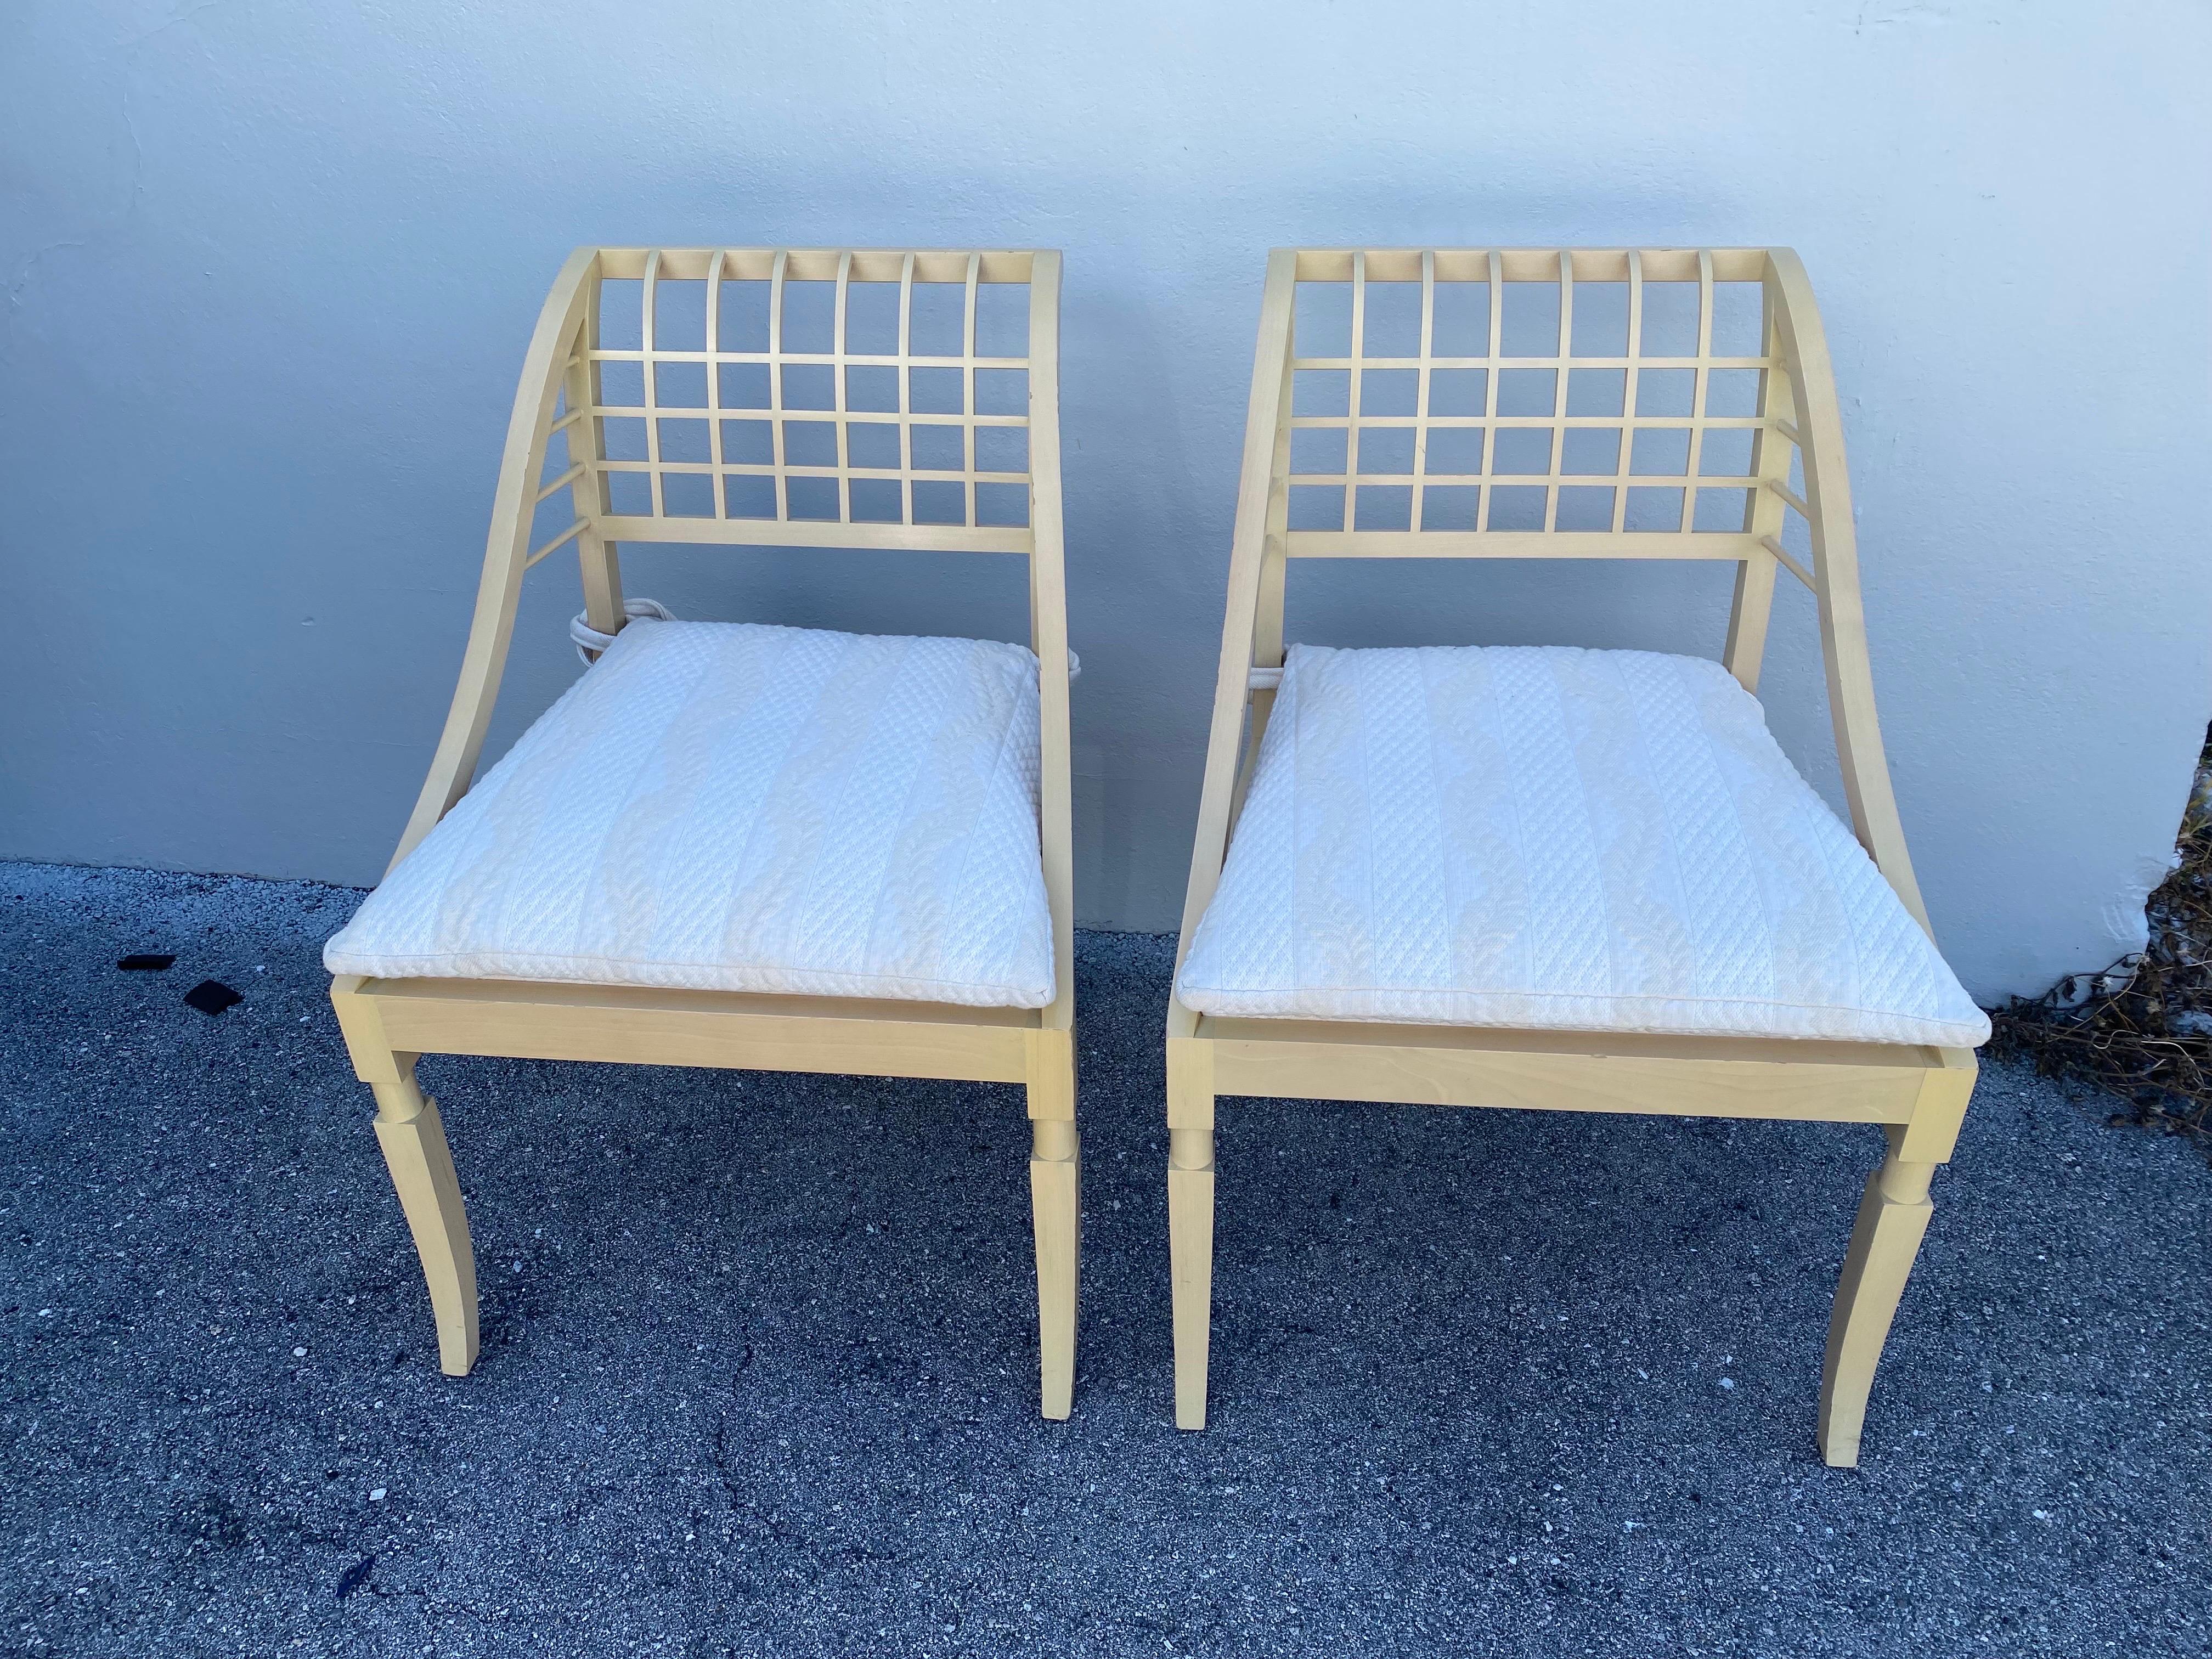 Pair of vintage (as found) John Saladino (b. 1939) sleigh chairs., featuring a muted yellow hue wood frame and lattice backrest. Included are tie-back white seat cushions. Showing wonderful craftsman style details.  THIS ITEM IS LOCATED AND WILL